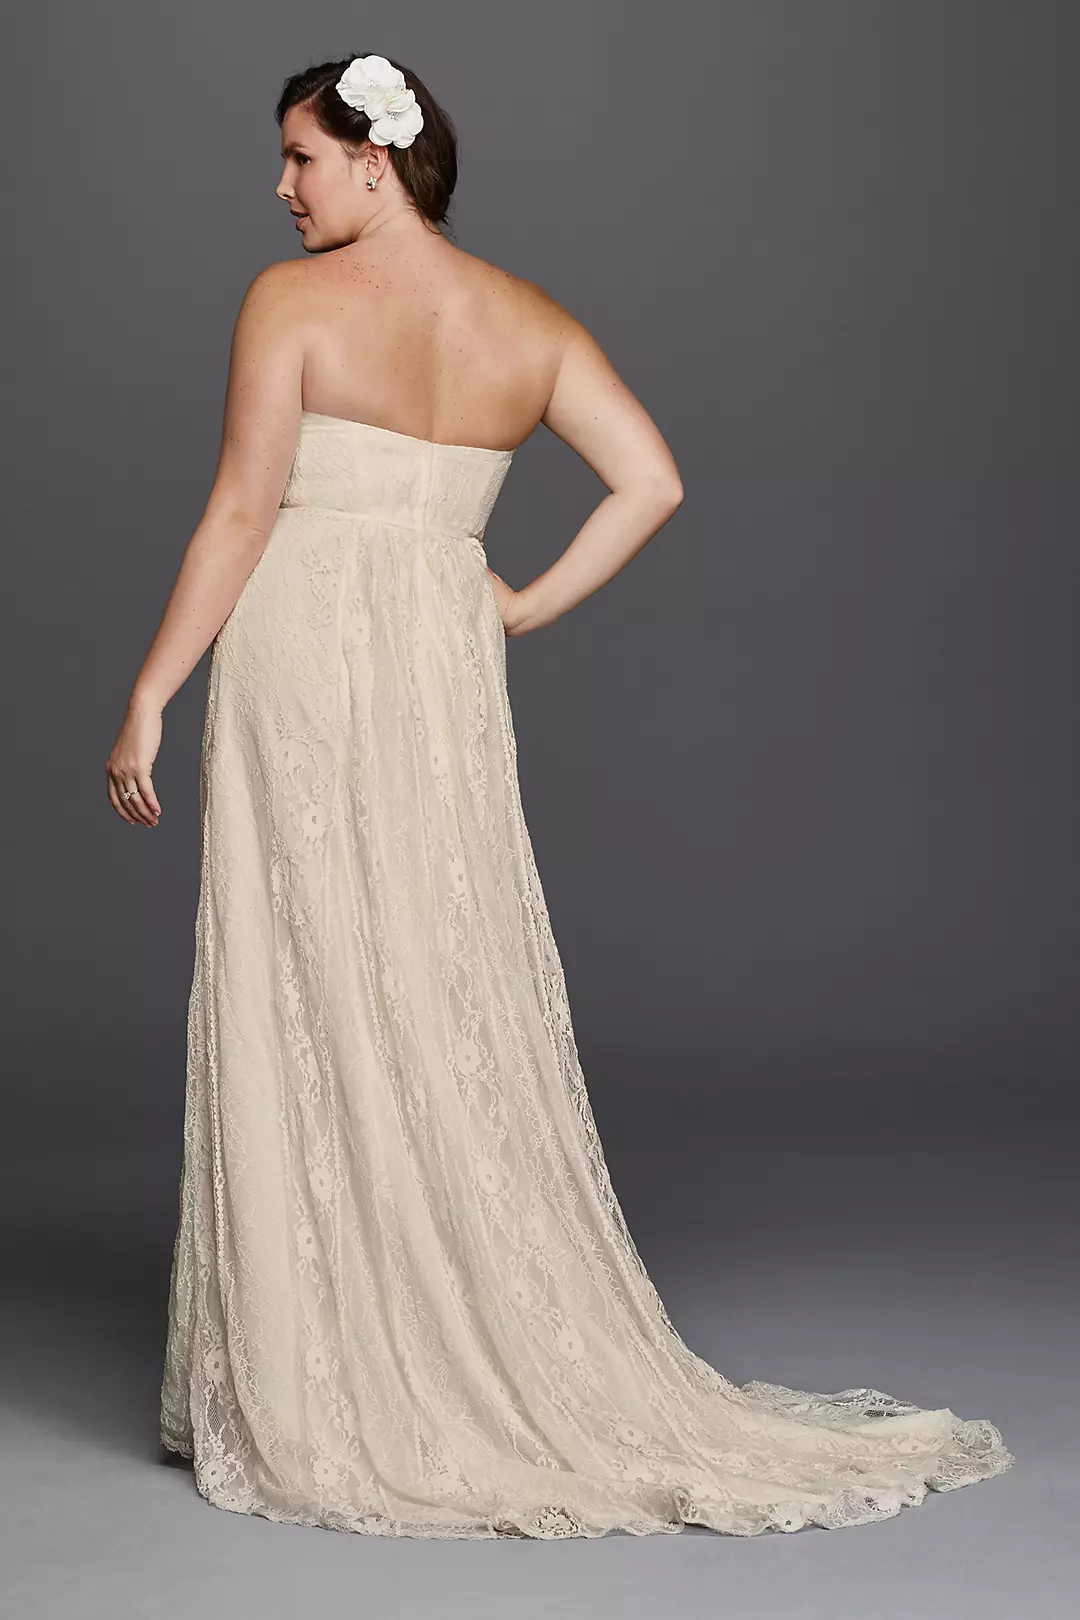 As-Is Linear Lace Overlay Plus Size Wedding Dress Image 2